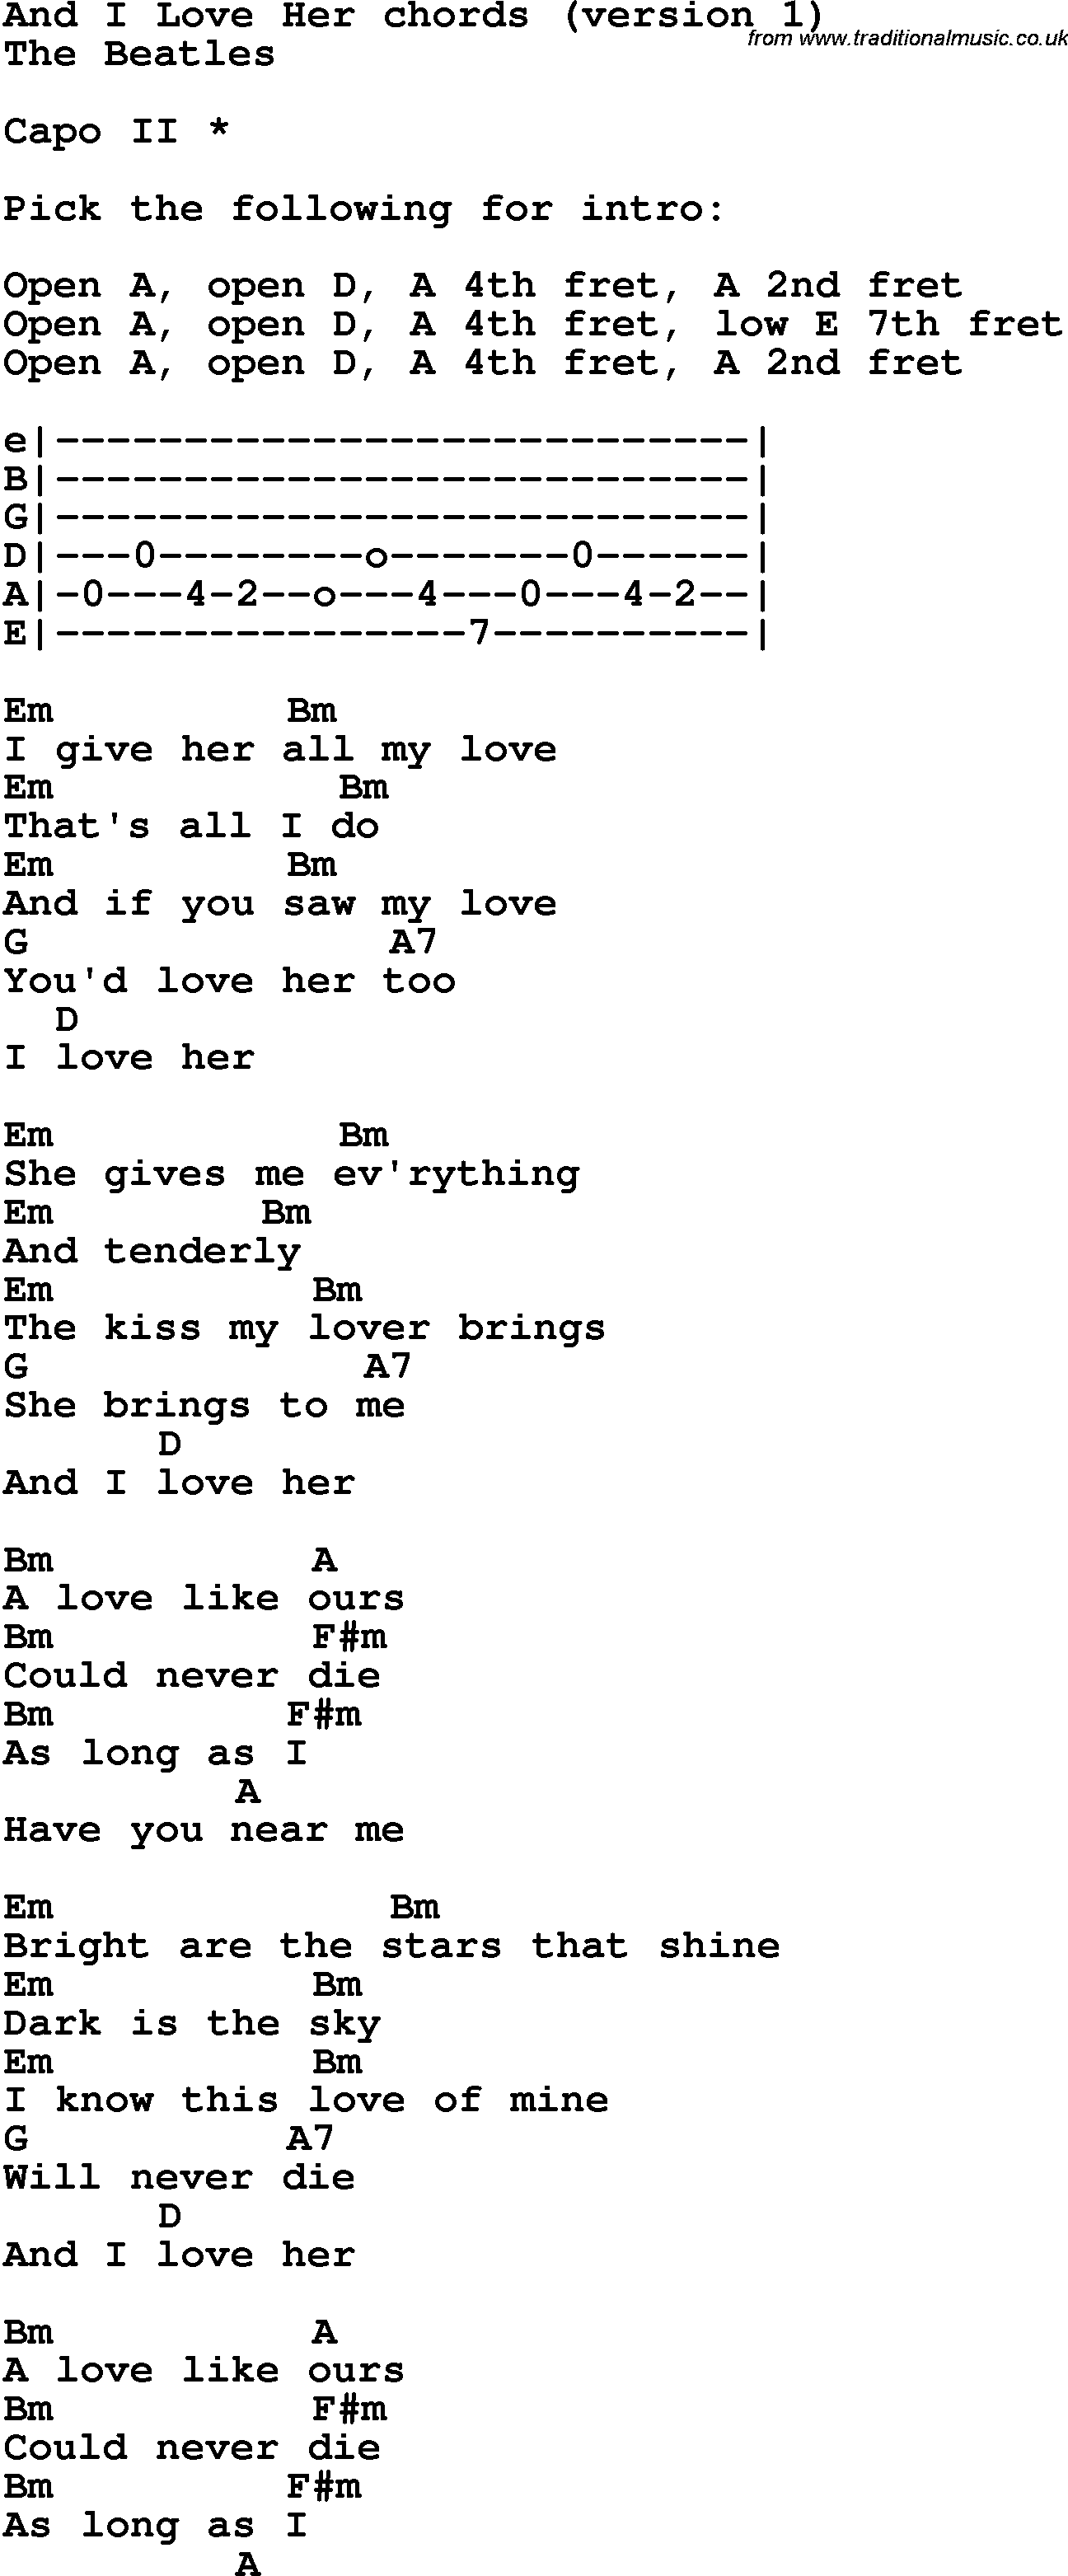 Song Lyrics with guitar chords for And I Love Her